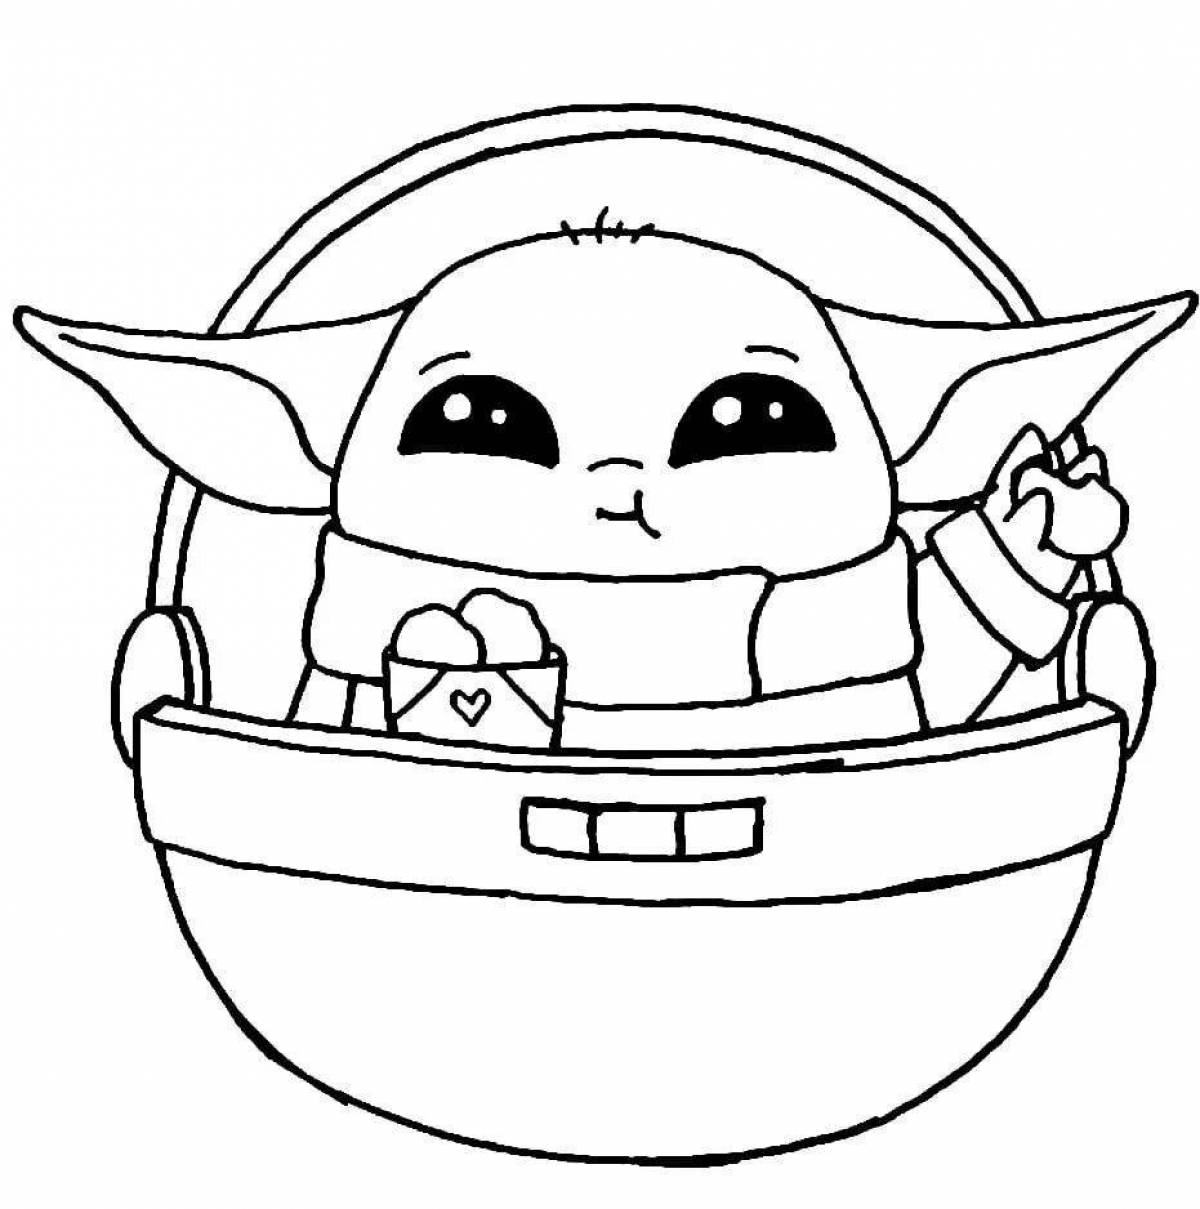 Charon baby coloring page